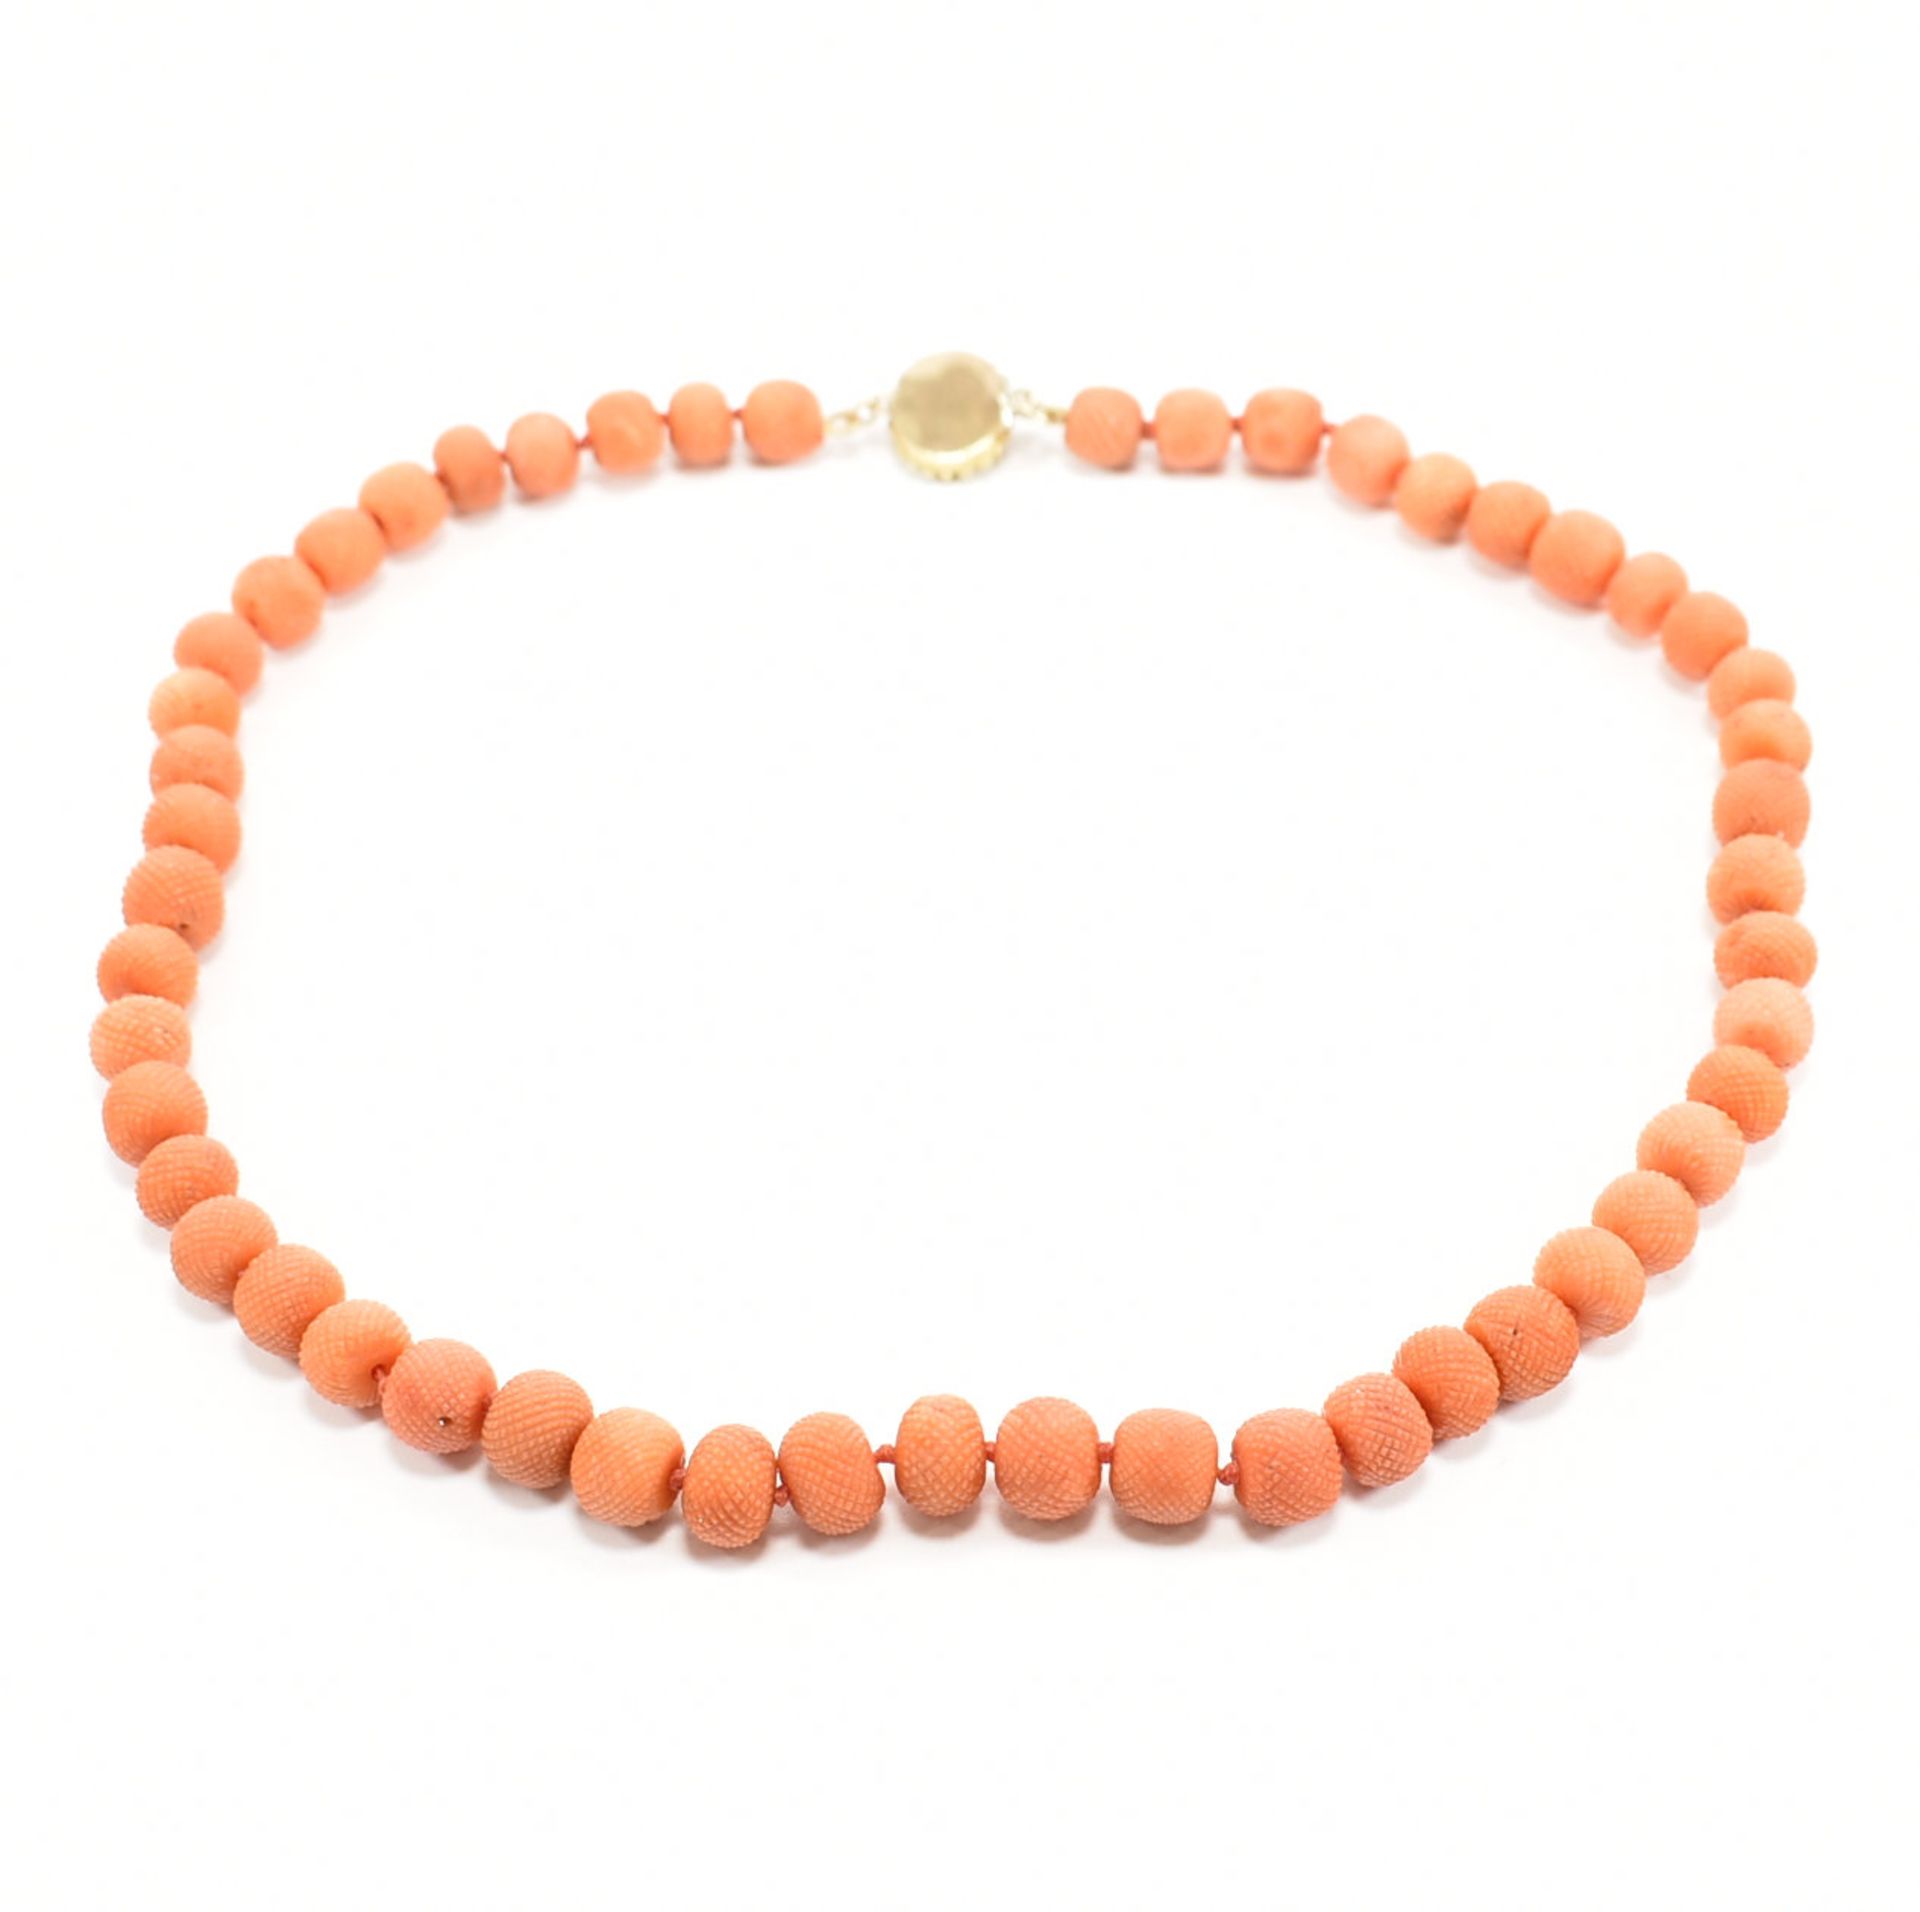 GEORGIAN CORAL PINEAPPLE BEAD NECKLACE - Image 8 of 8